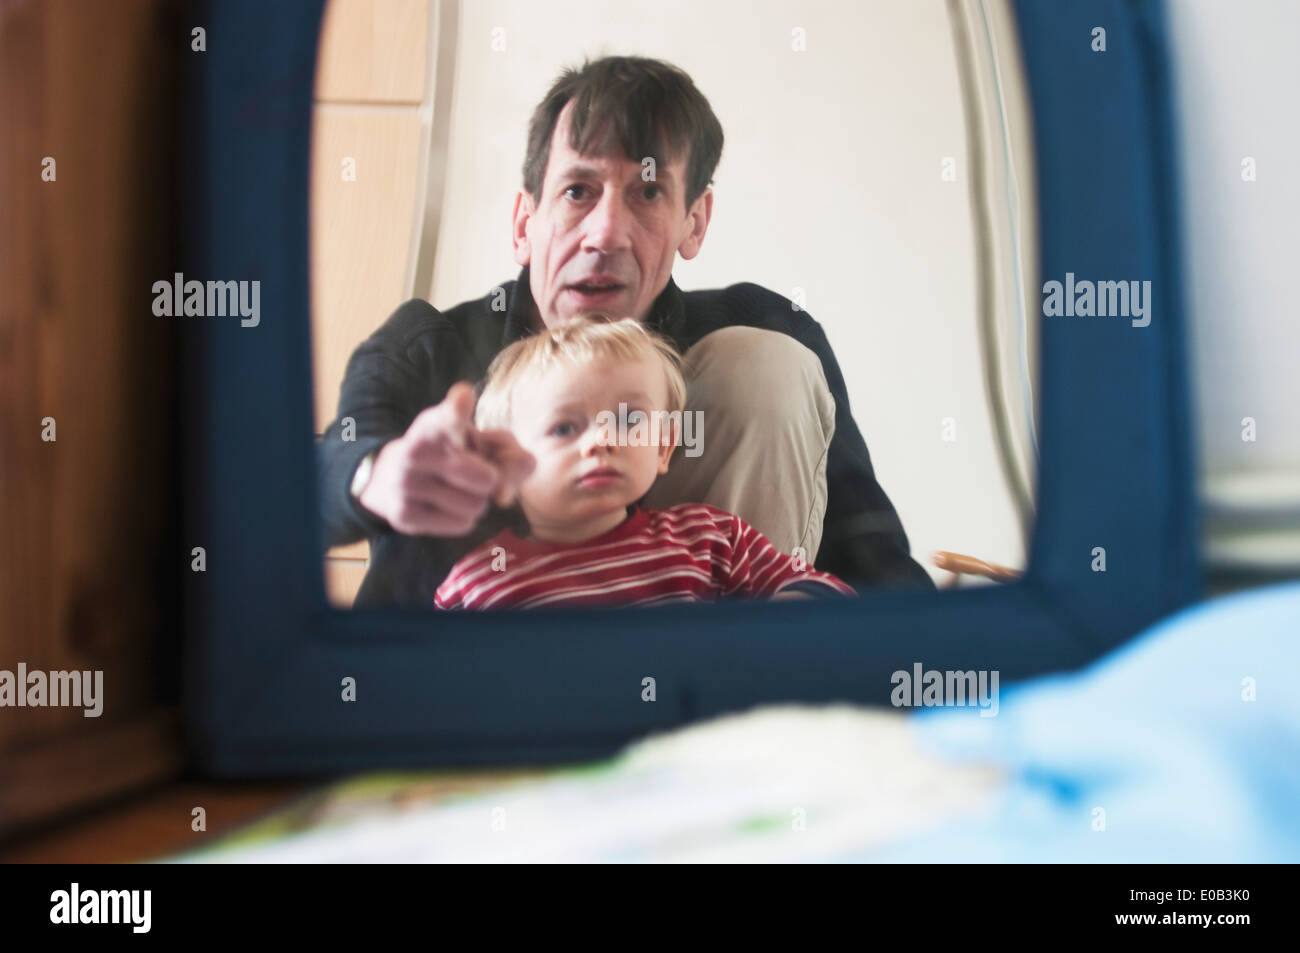 Germany, Father and son looking in mirror Stock Photo